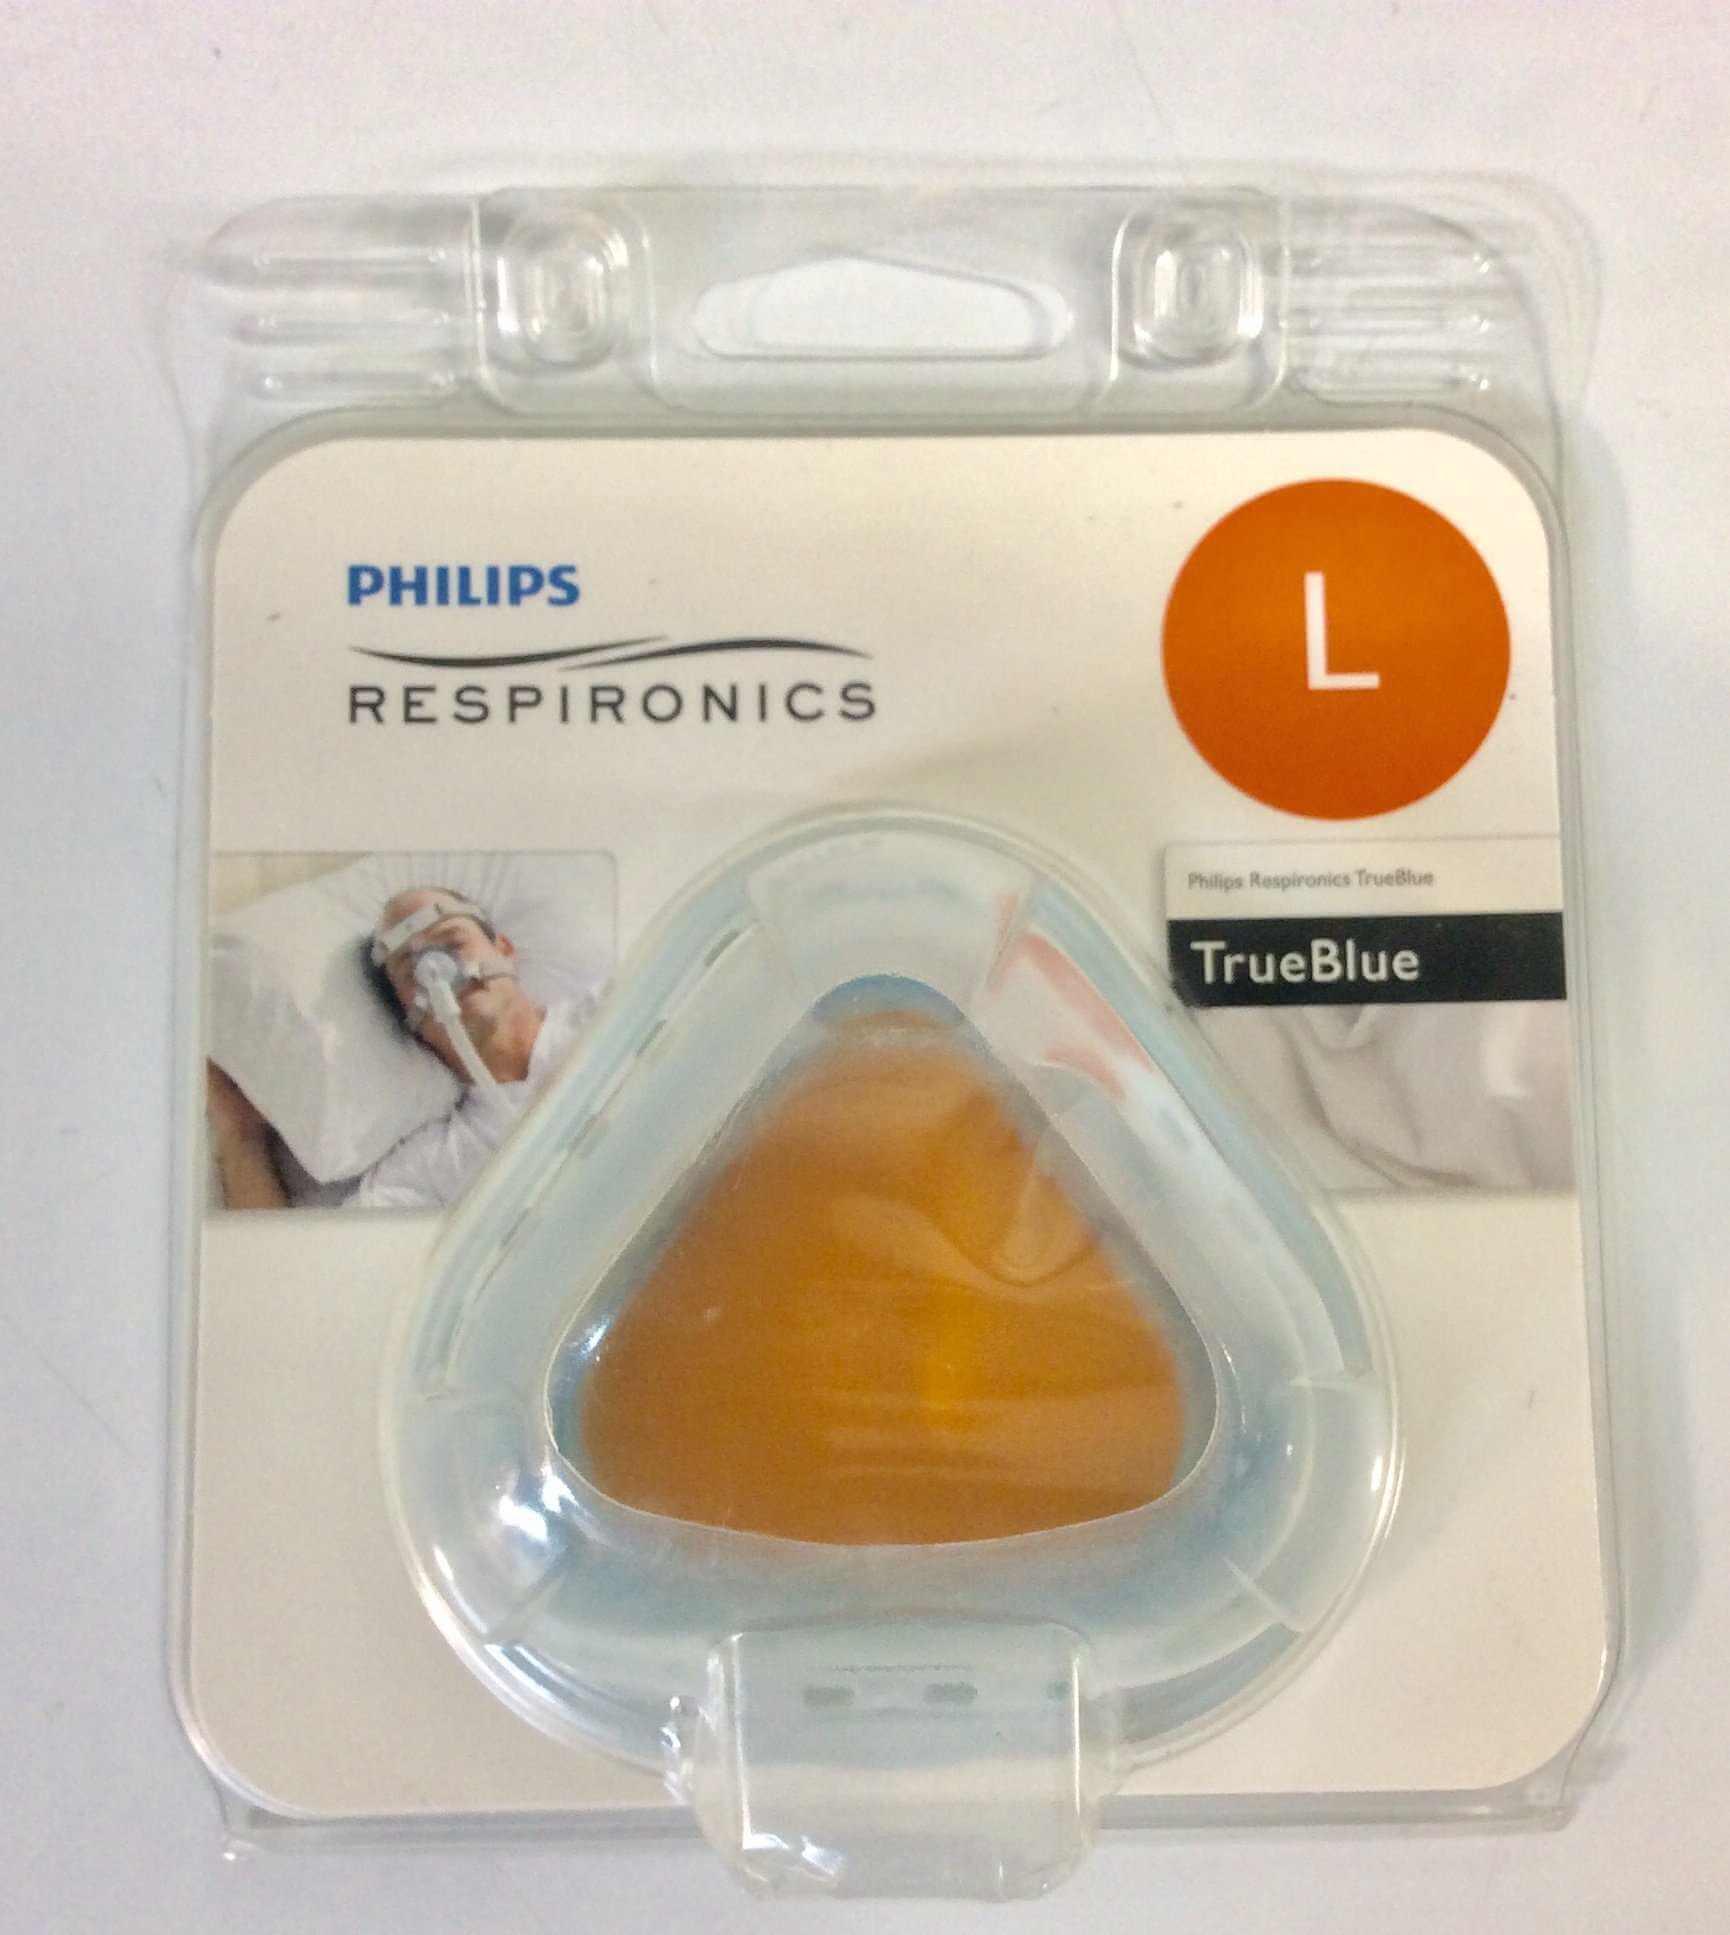 NEW Philips Respironics TrueBlue CPAP Mask Nasal Cushion And Flap 1071865 FREE Shipping - MBR Medicals